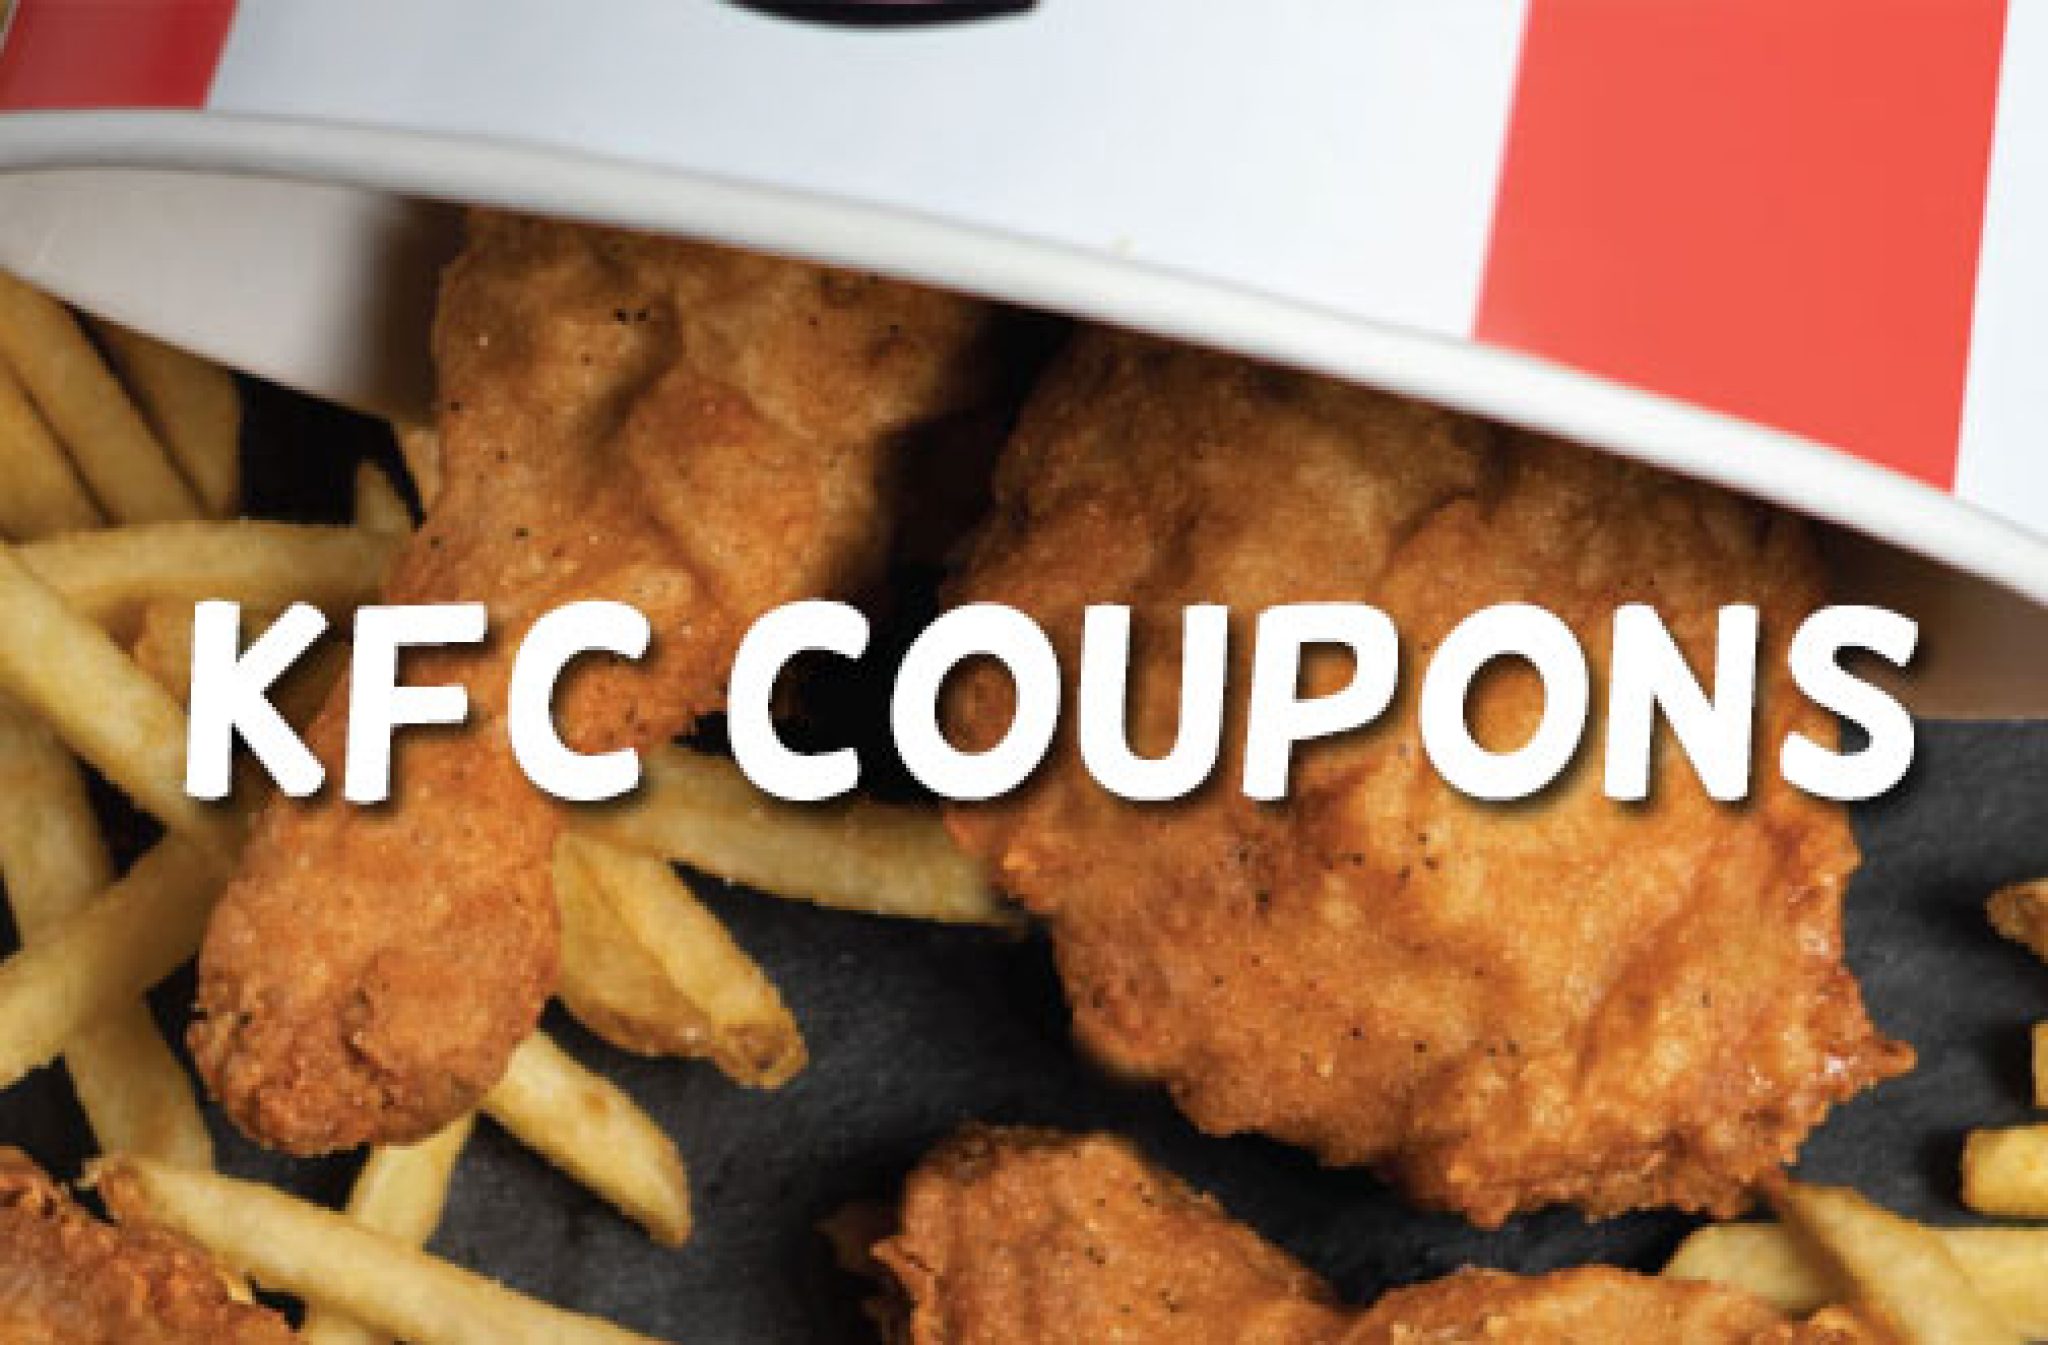 kfc coupons canada june 2020 deals from savealoonie